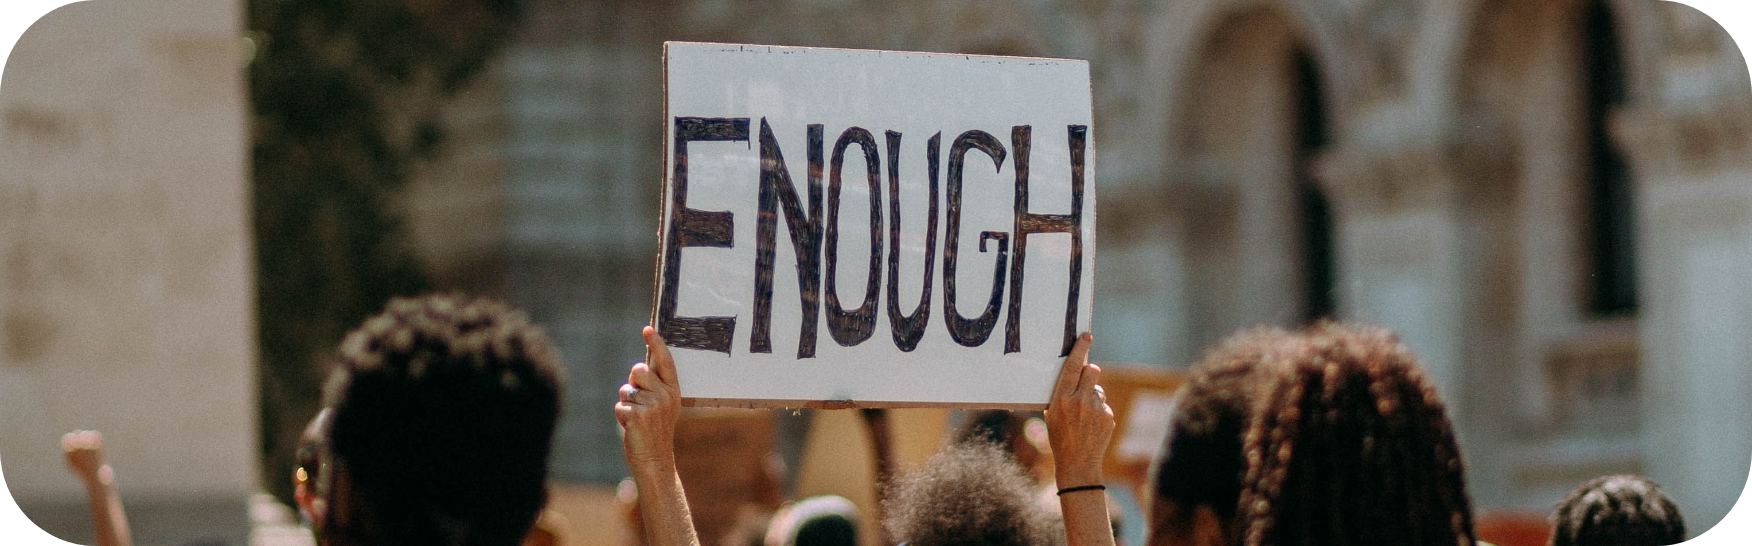 A protest sign help high with the word enough